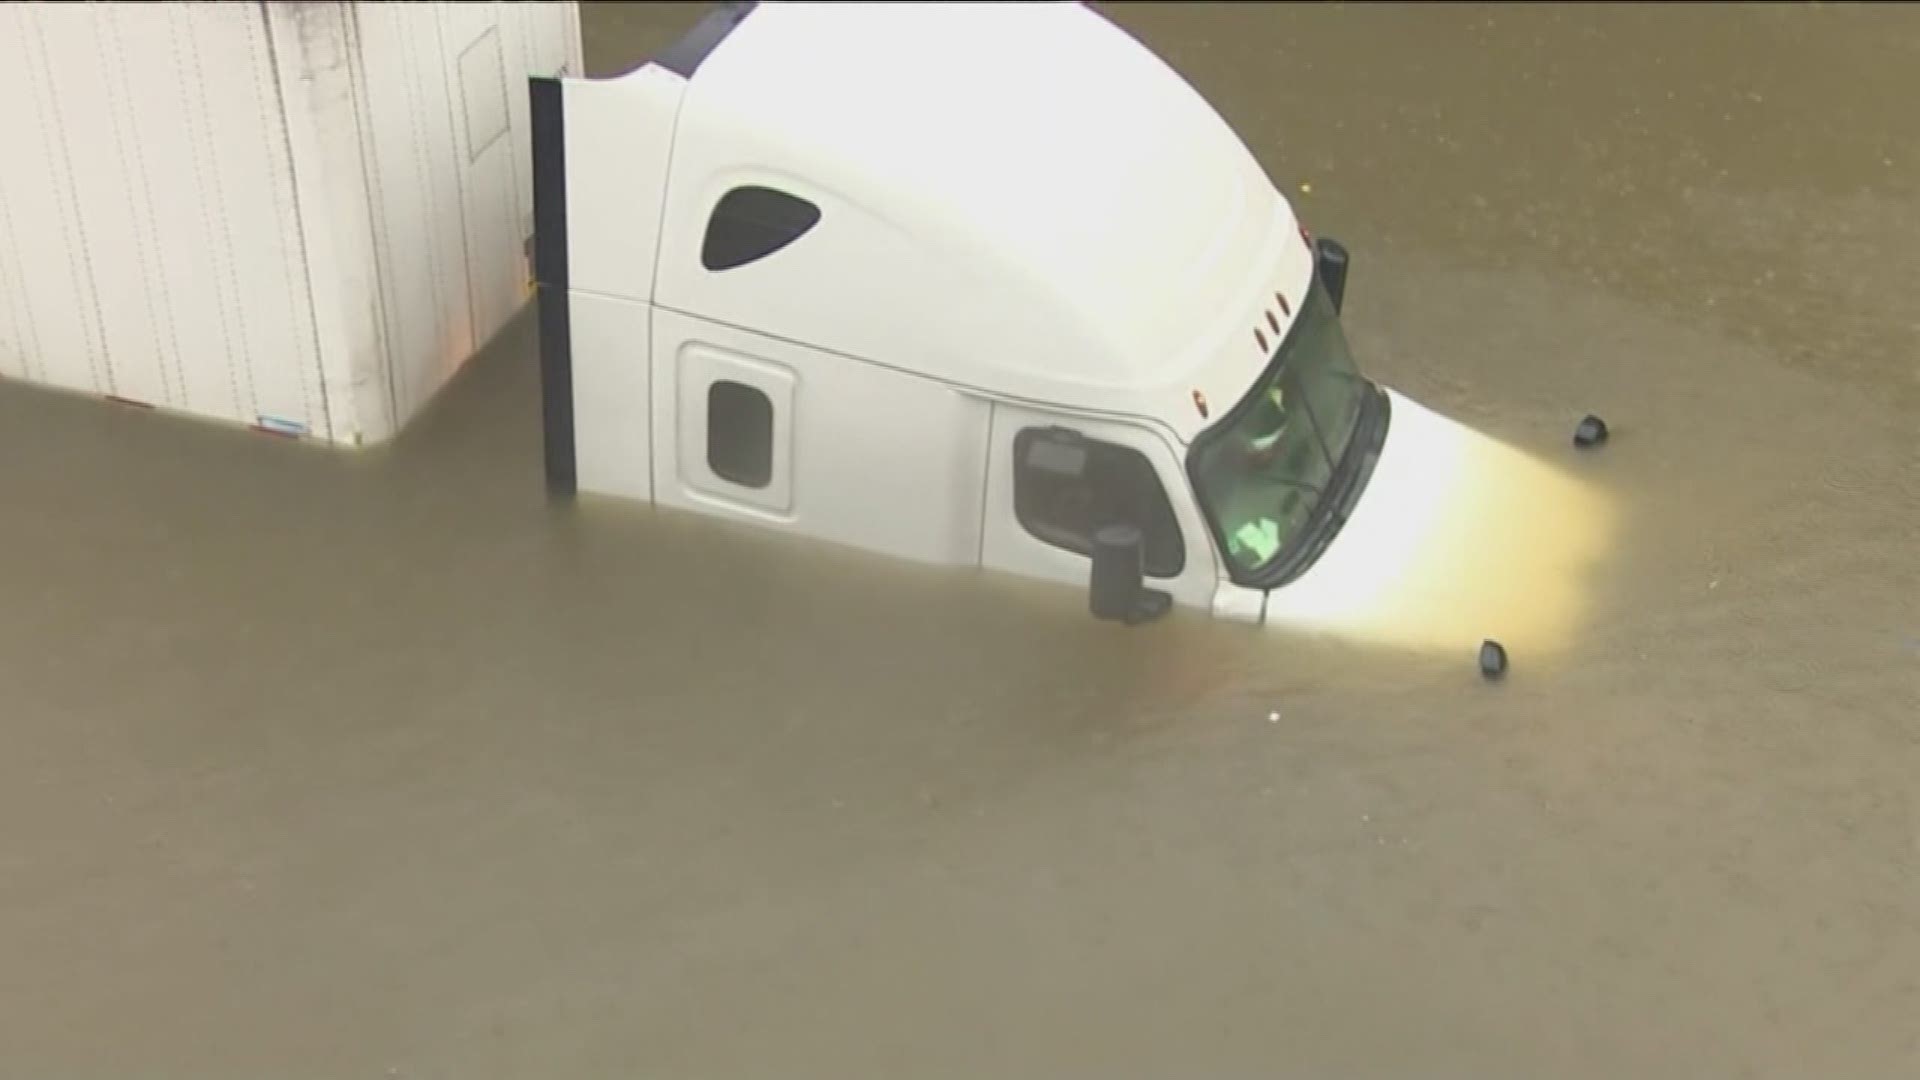 KHOU 11 reporter Brandi Smith and photographer Mario Sandoval helped rescue a truck driver who was trapped in floodwaters in north Houston. (Note: Video ends before the rescue.)